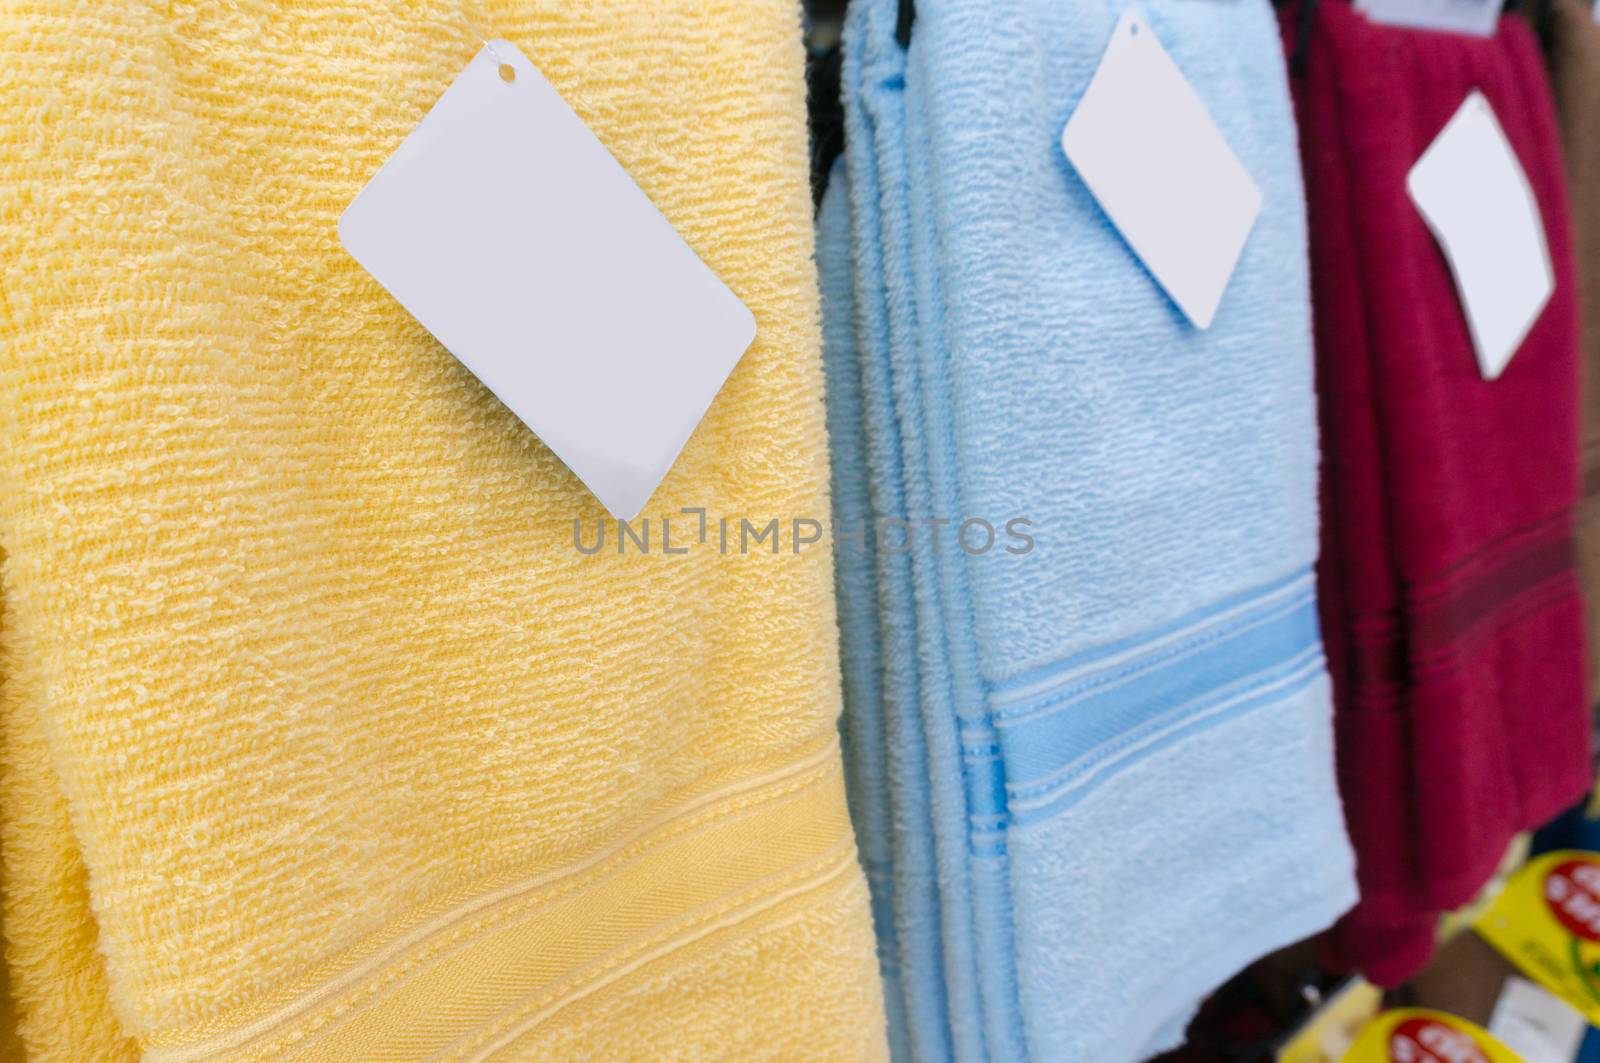 Colorful towels on supermarket shelves by thampapon